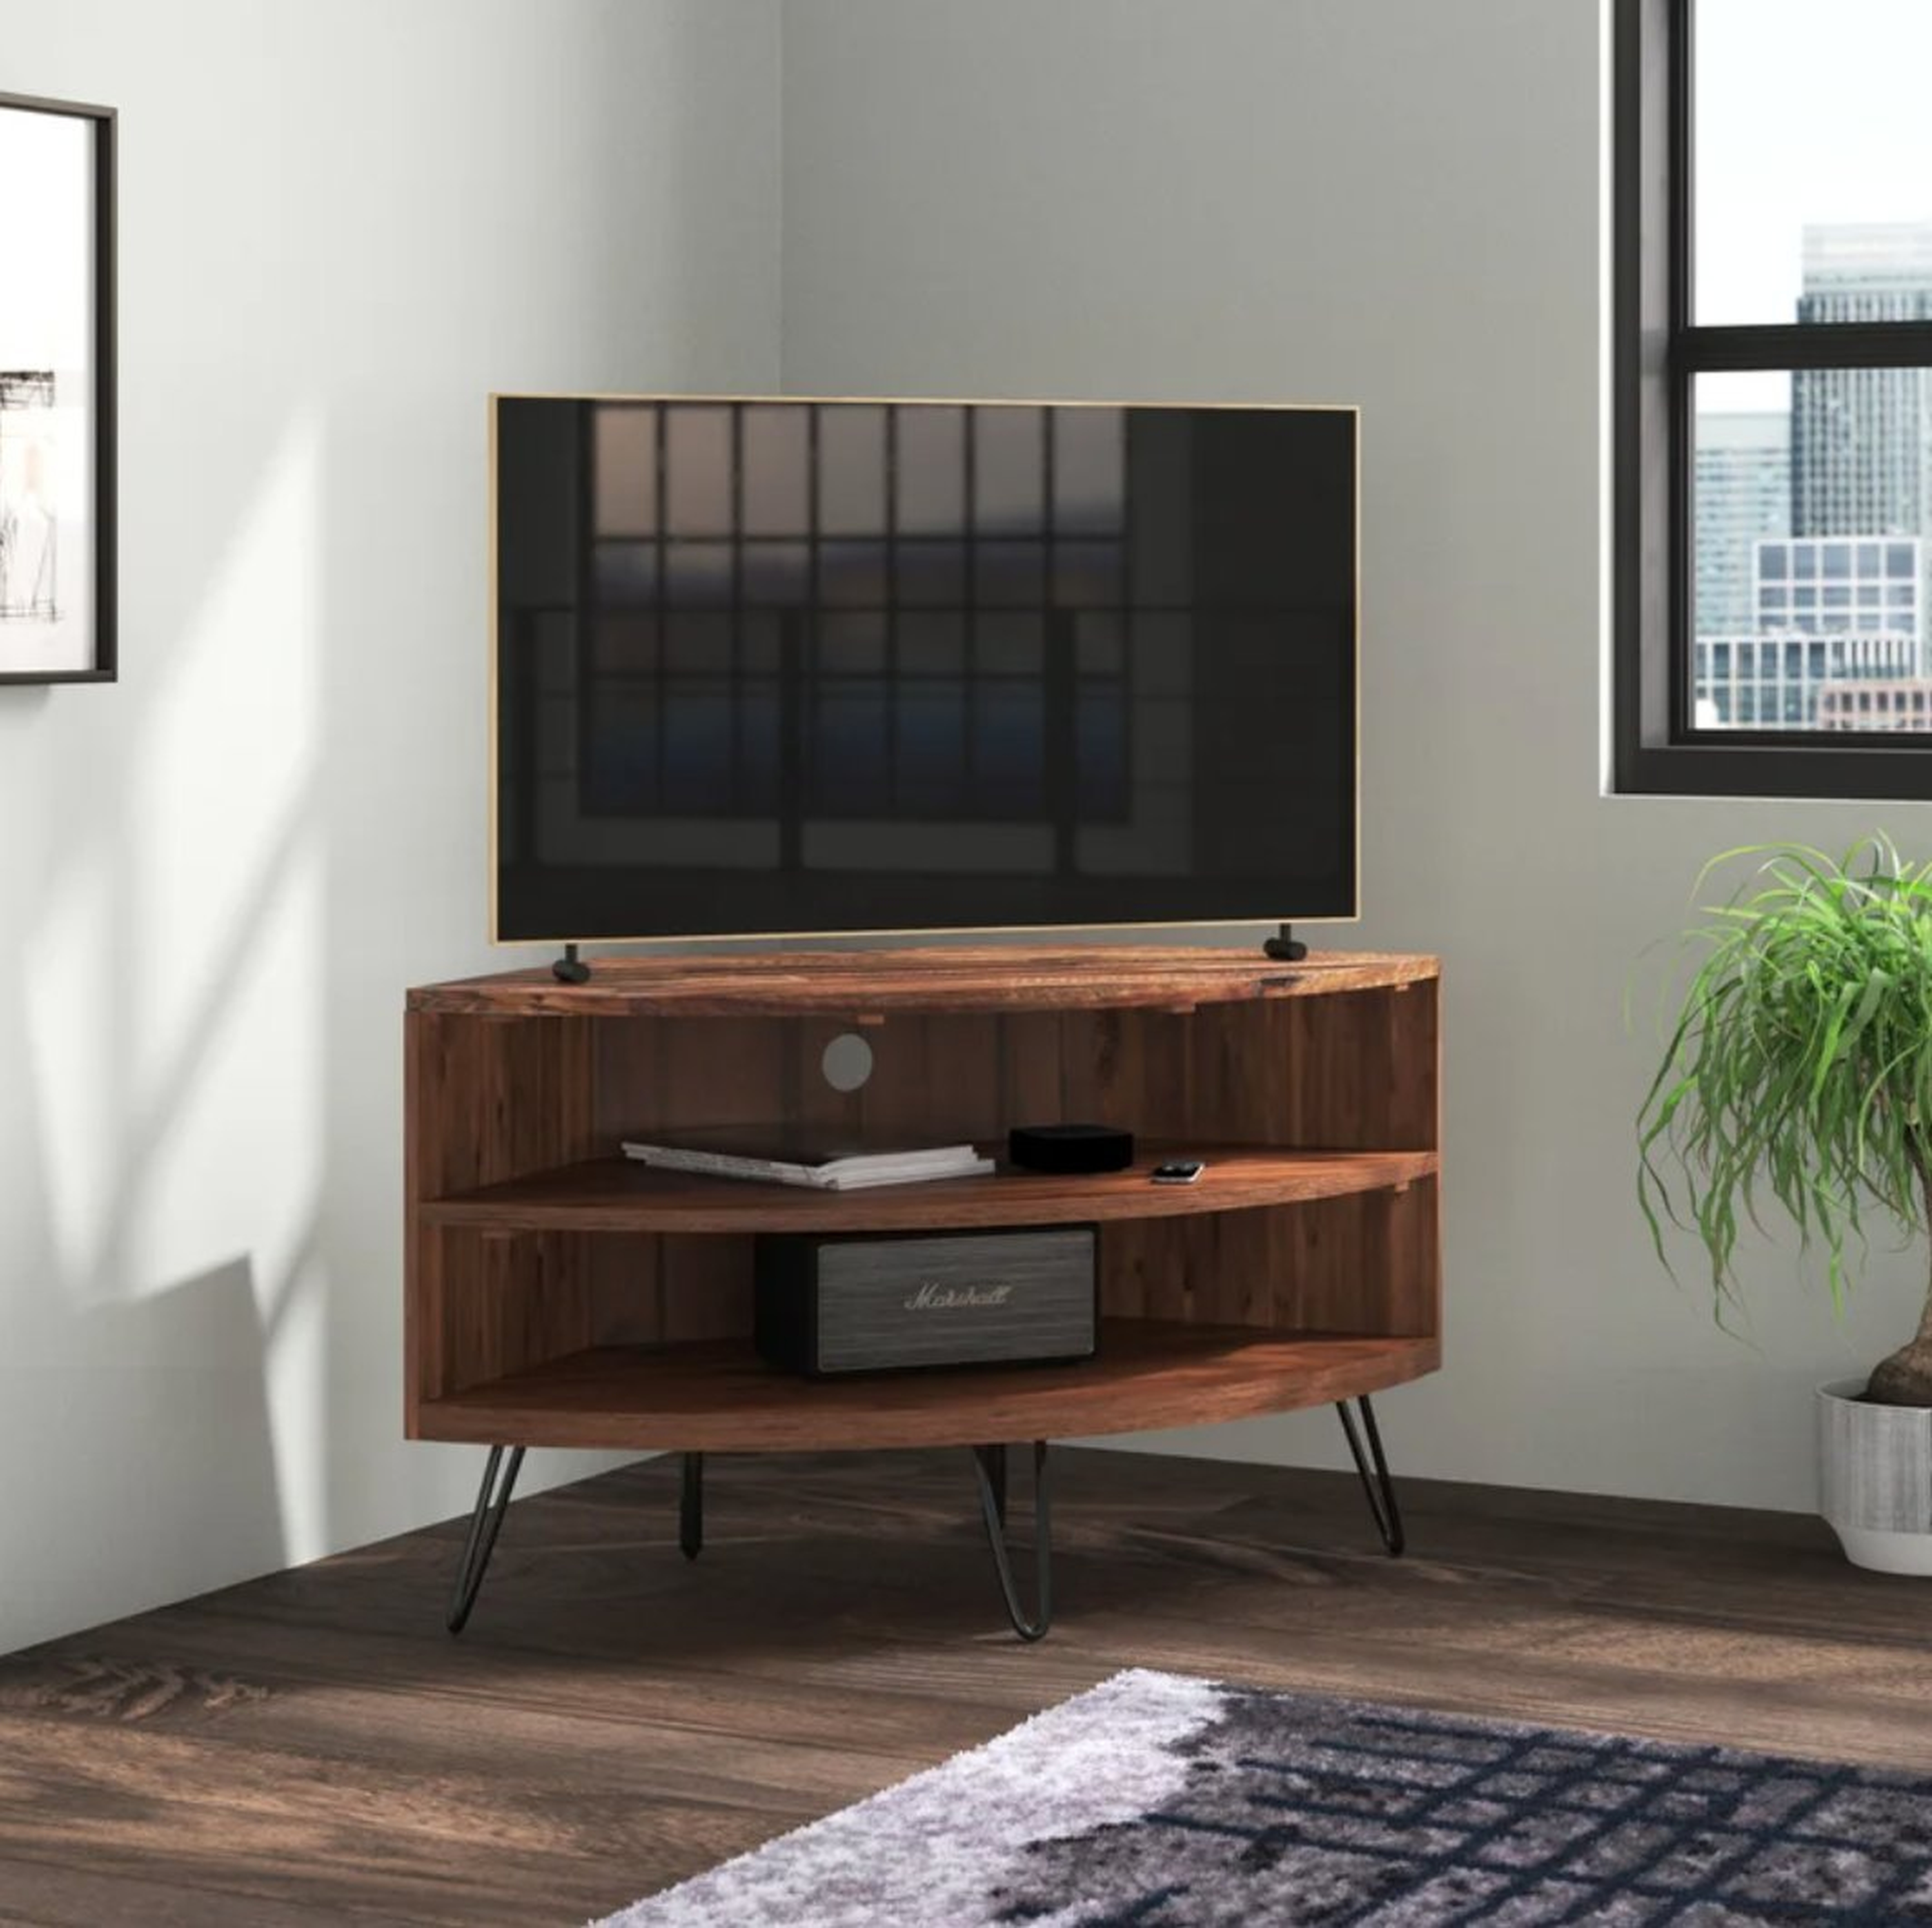 Gussie Solid Wood Corner unit TV Stand for TVs up to 43" - Wayfair